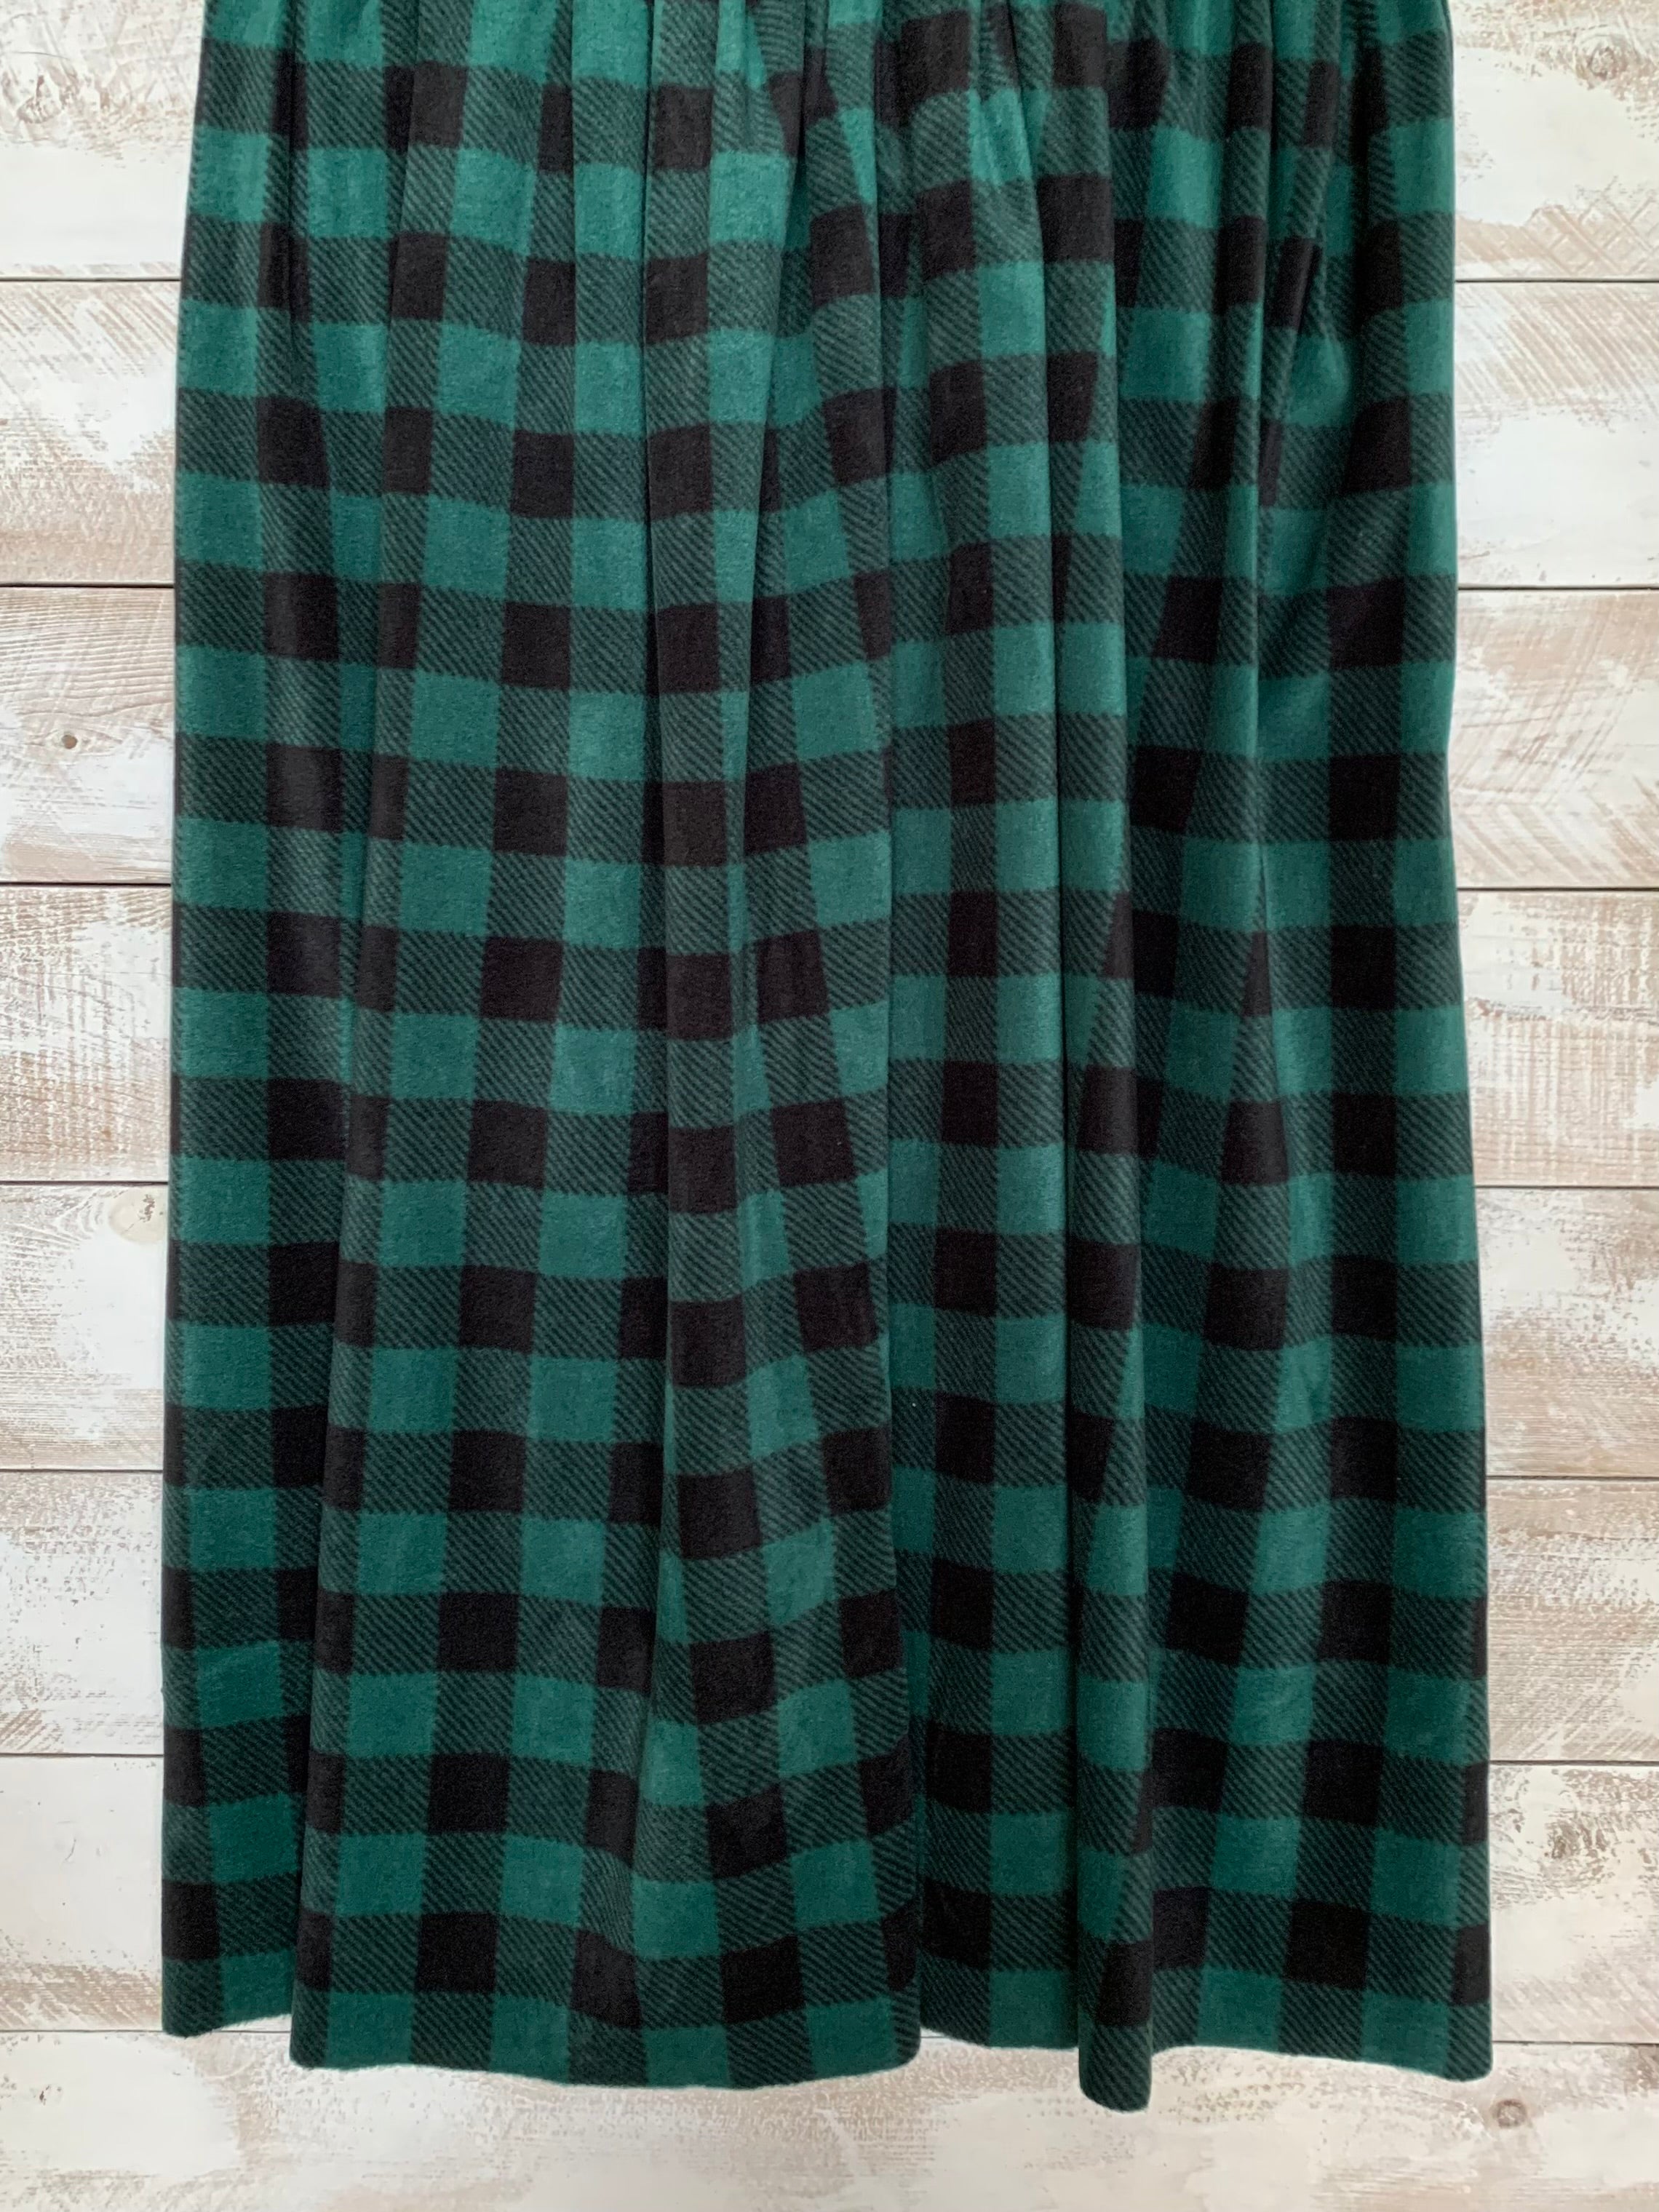 No Sew Blanket Kit - Buffalo Green and Black Plaid - Personalization Available